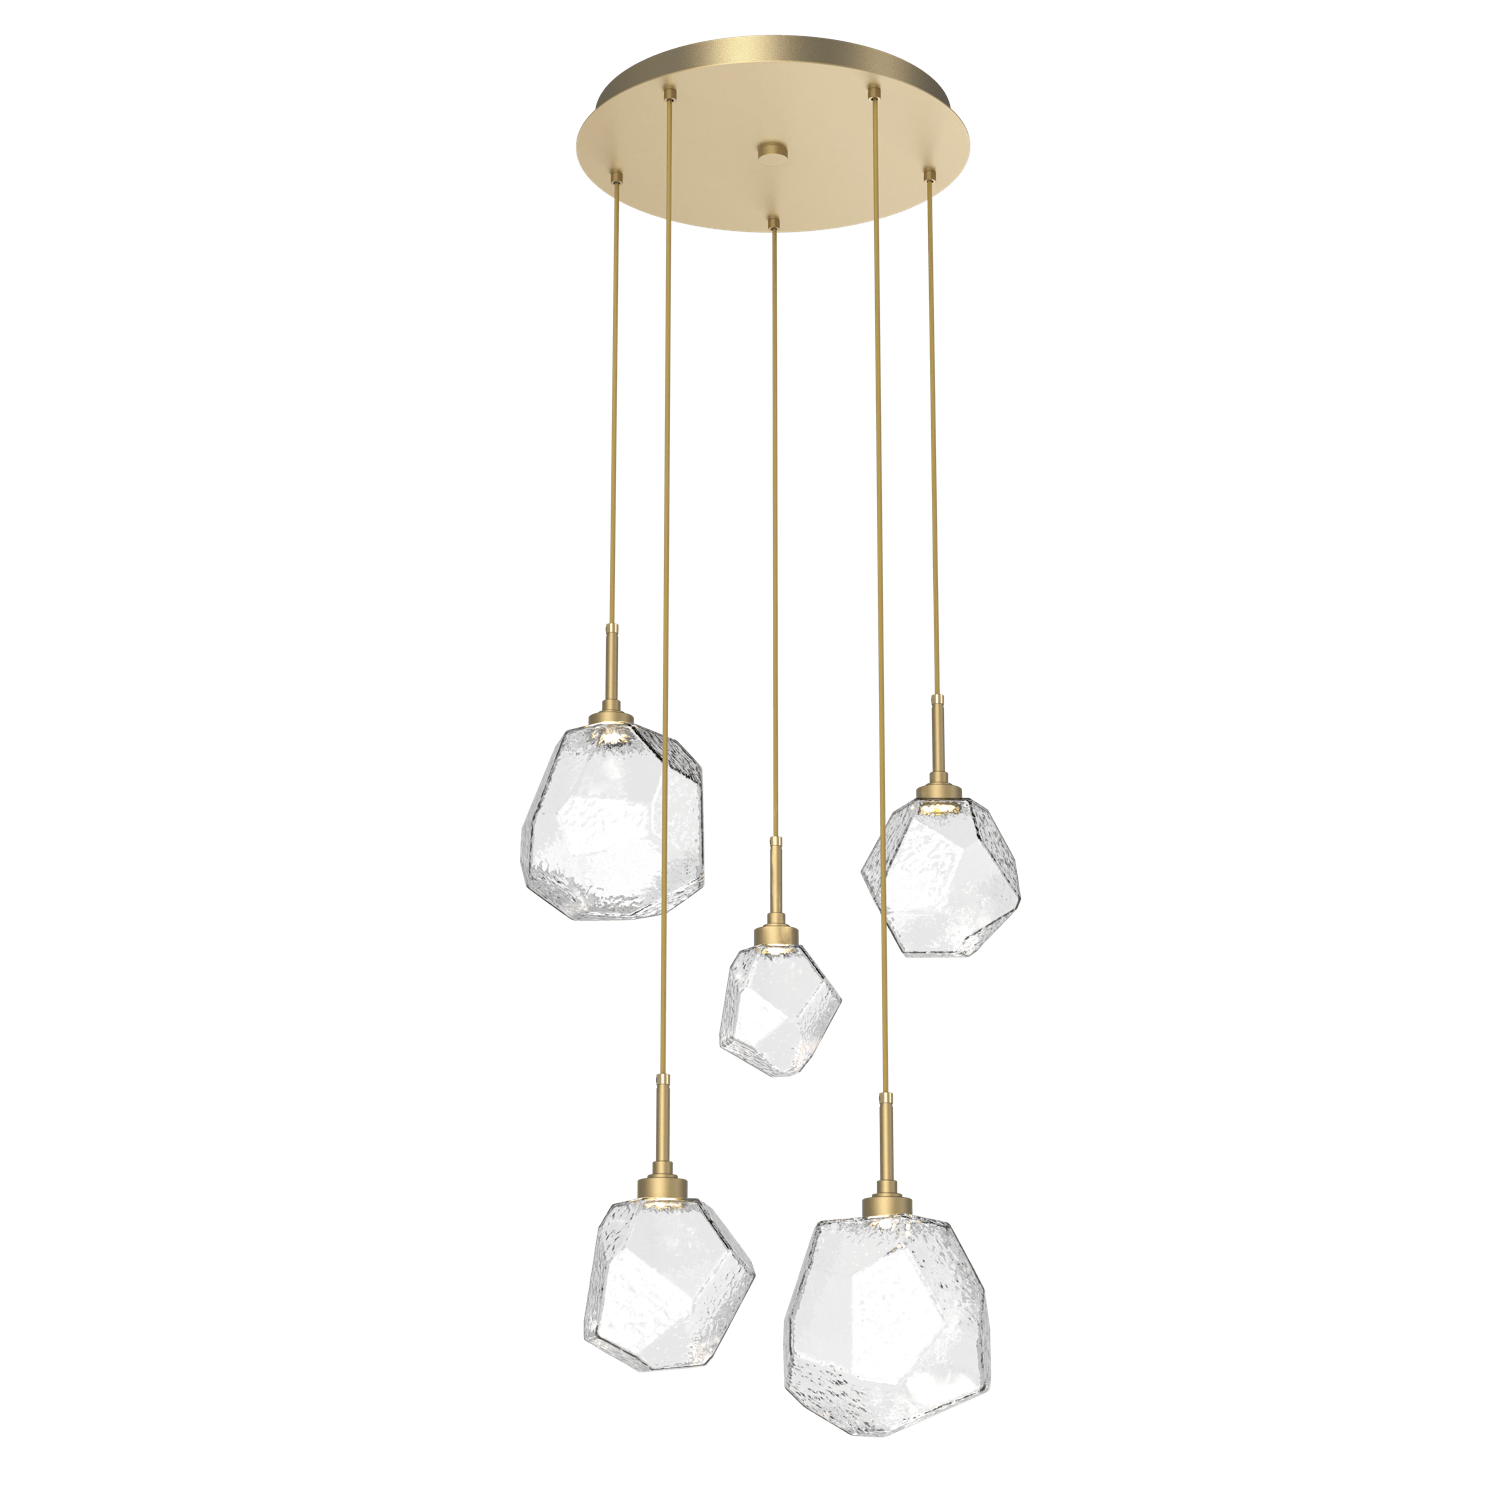 CHB0039-05-GB-C-Hammerton-Studio-Gem-5-light-round-pendant-chandelier-with-gilded-brass-finish-and-clear-blown-glass-shades-and-LED-lamping